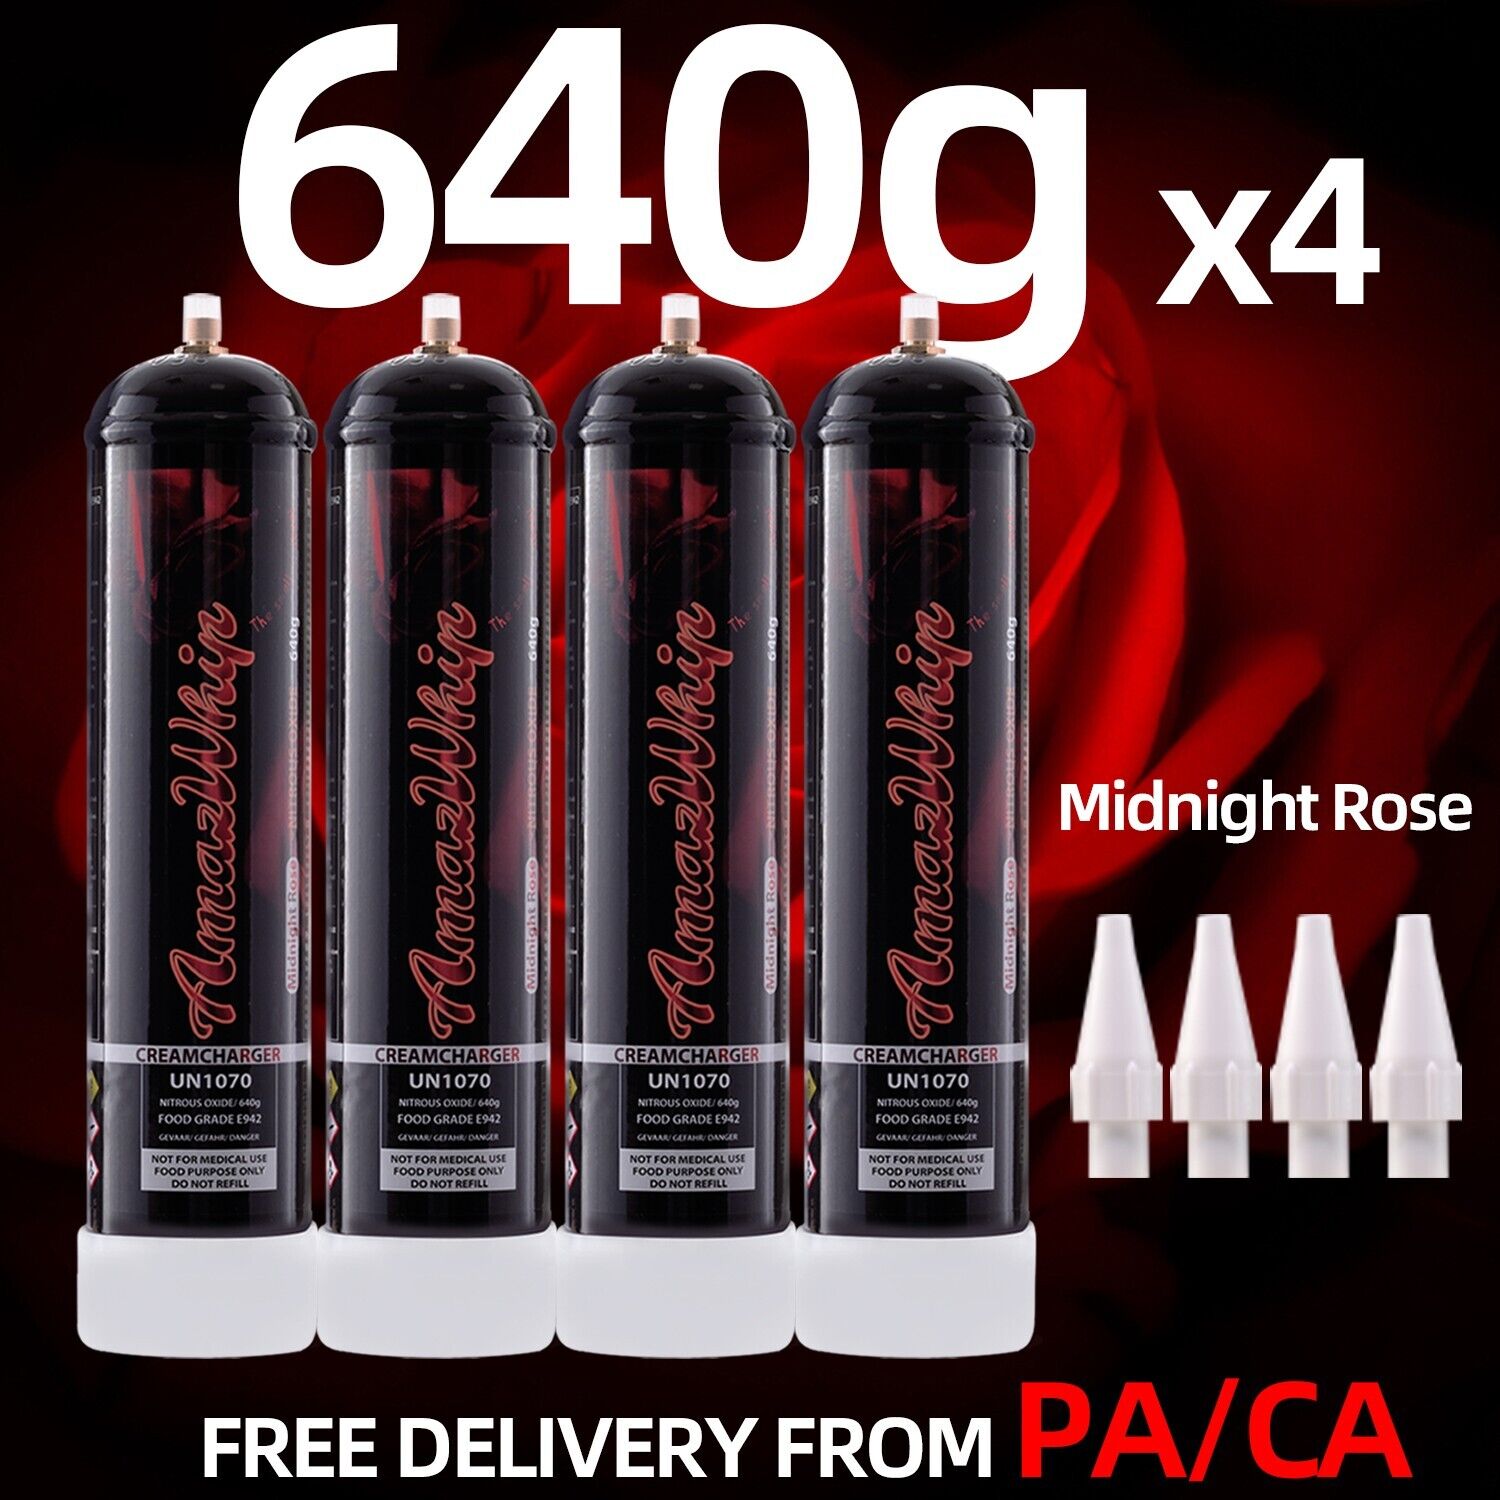 AmazWhip Whipped Cream Charger 640g Tank Pure Rose Flavor 4 cylinders